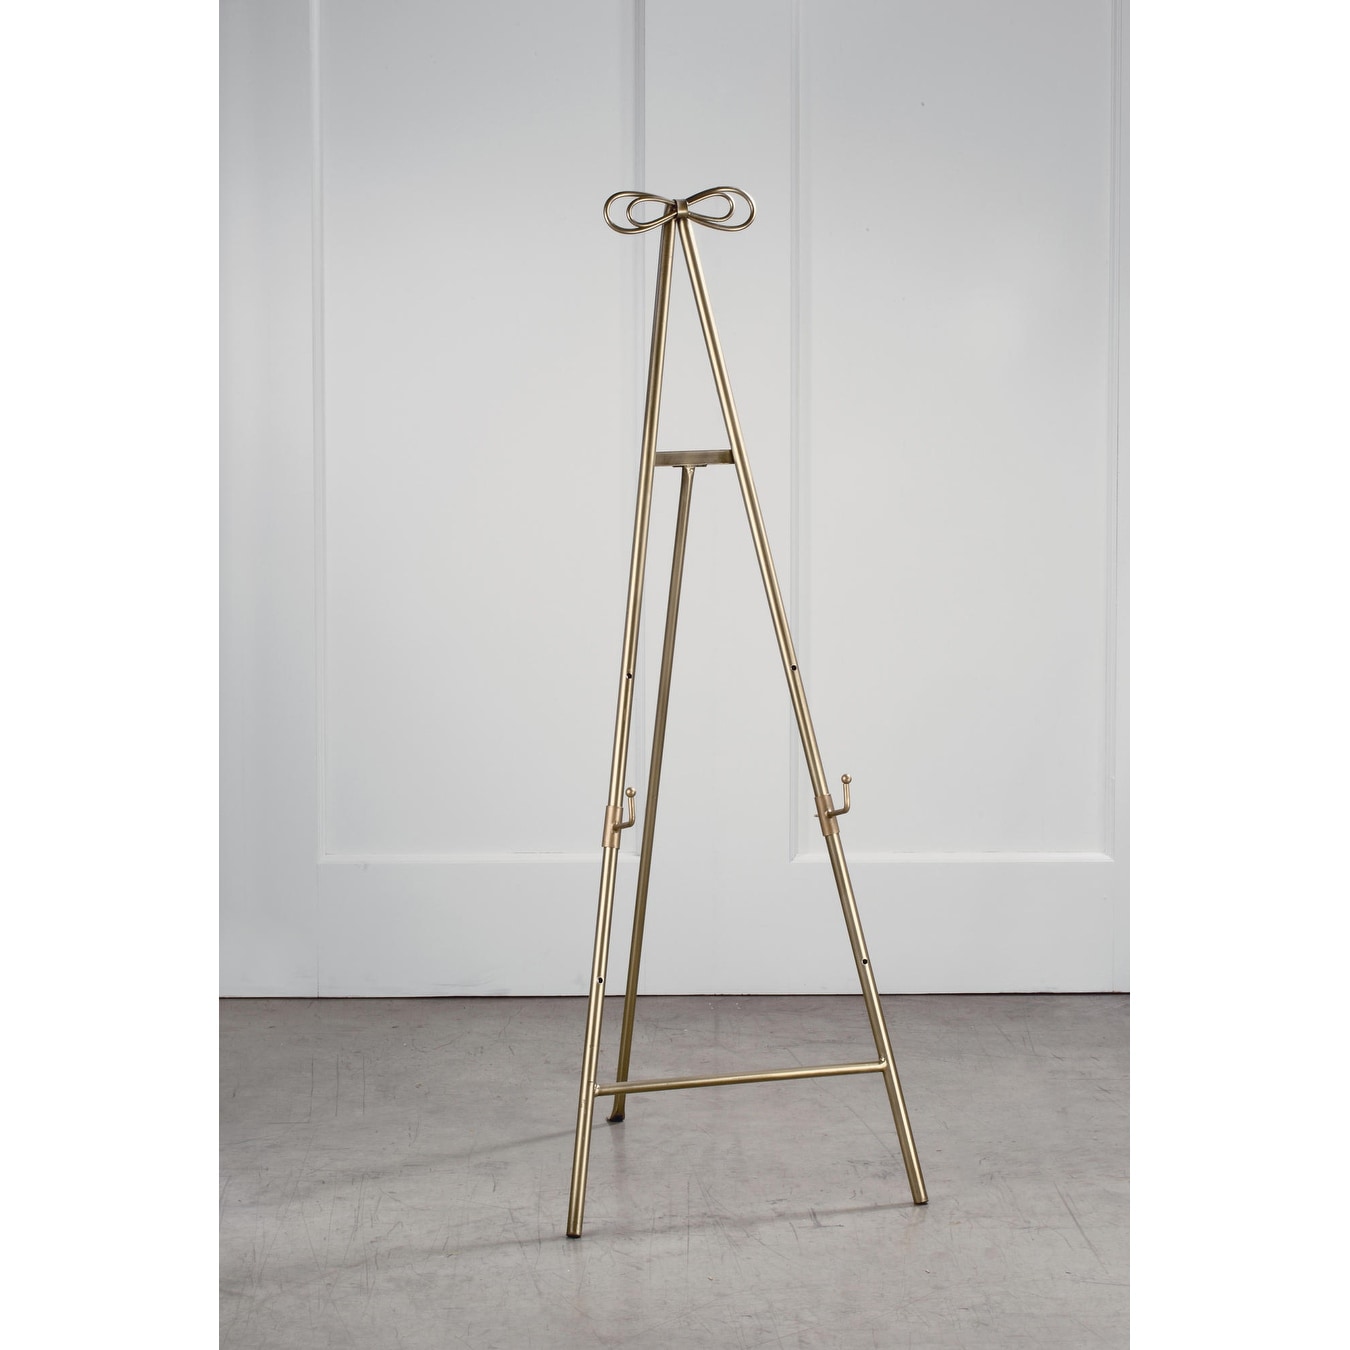 Rose Gold Easel for Wedding Sign, Lightweight Easel Picture Stand With  Shelf, Easel Display Tabletop Welcome Decoration,floor Easel Painting 